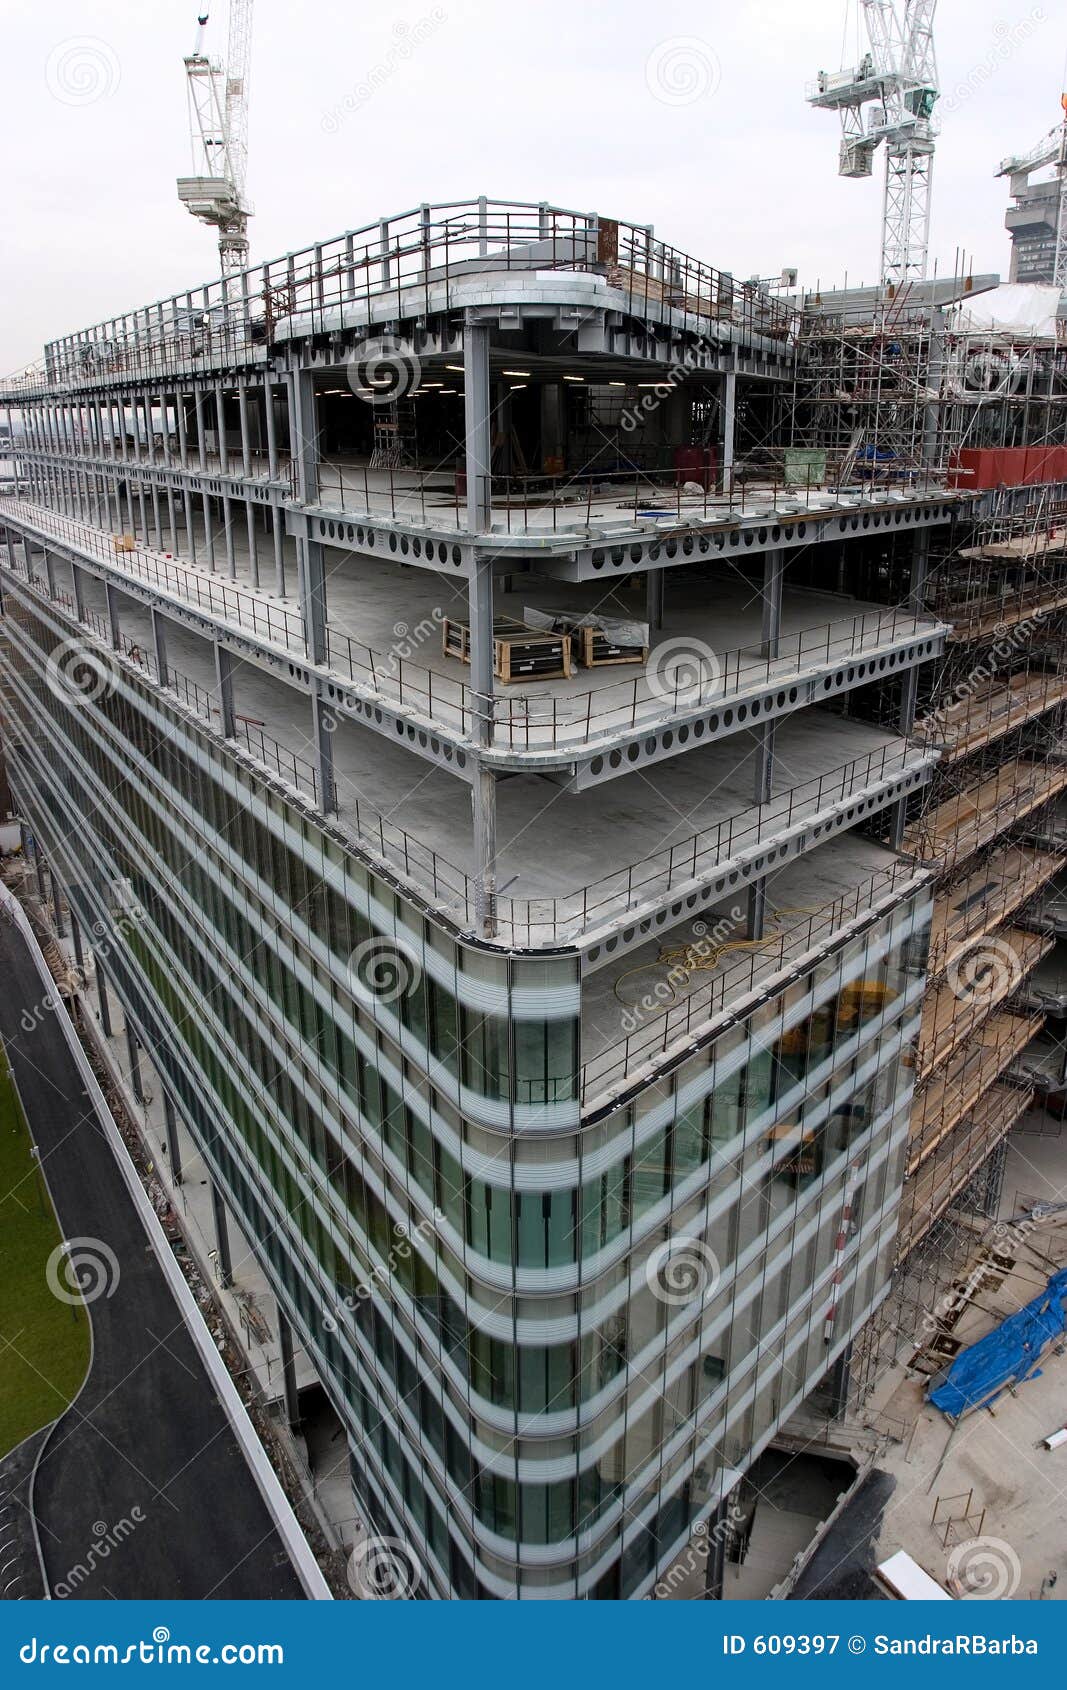 Building area stock image. Image of construction, architecture - 609397